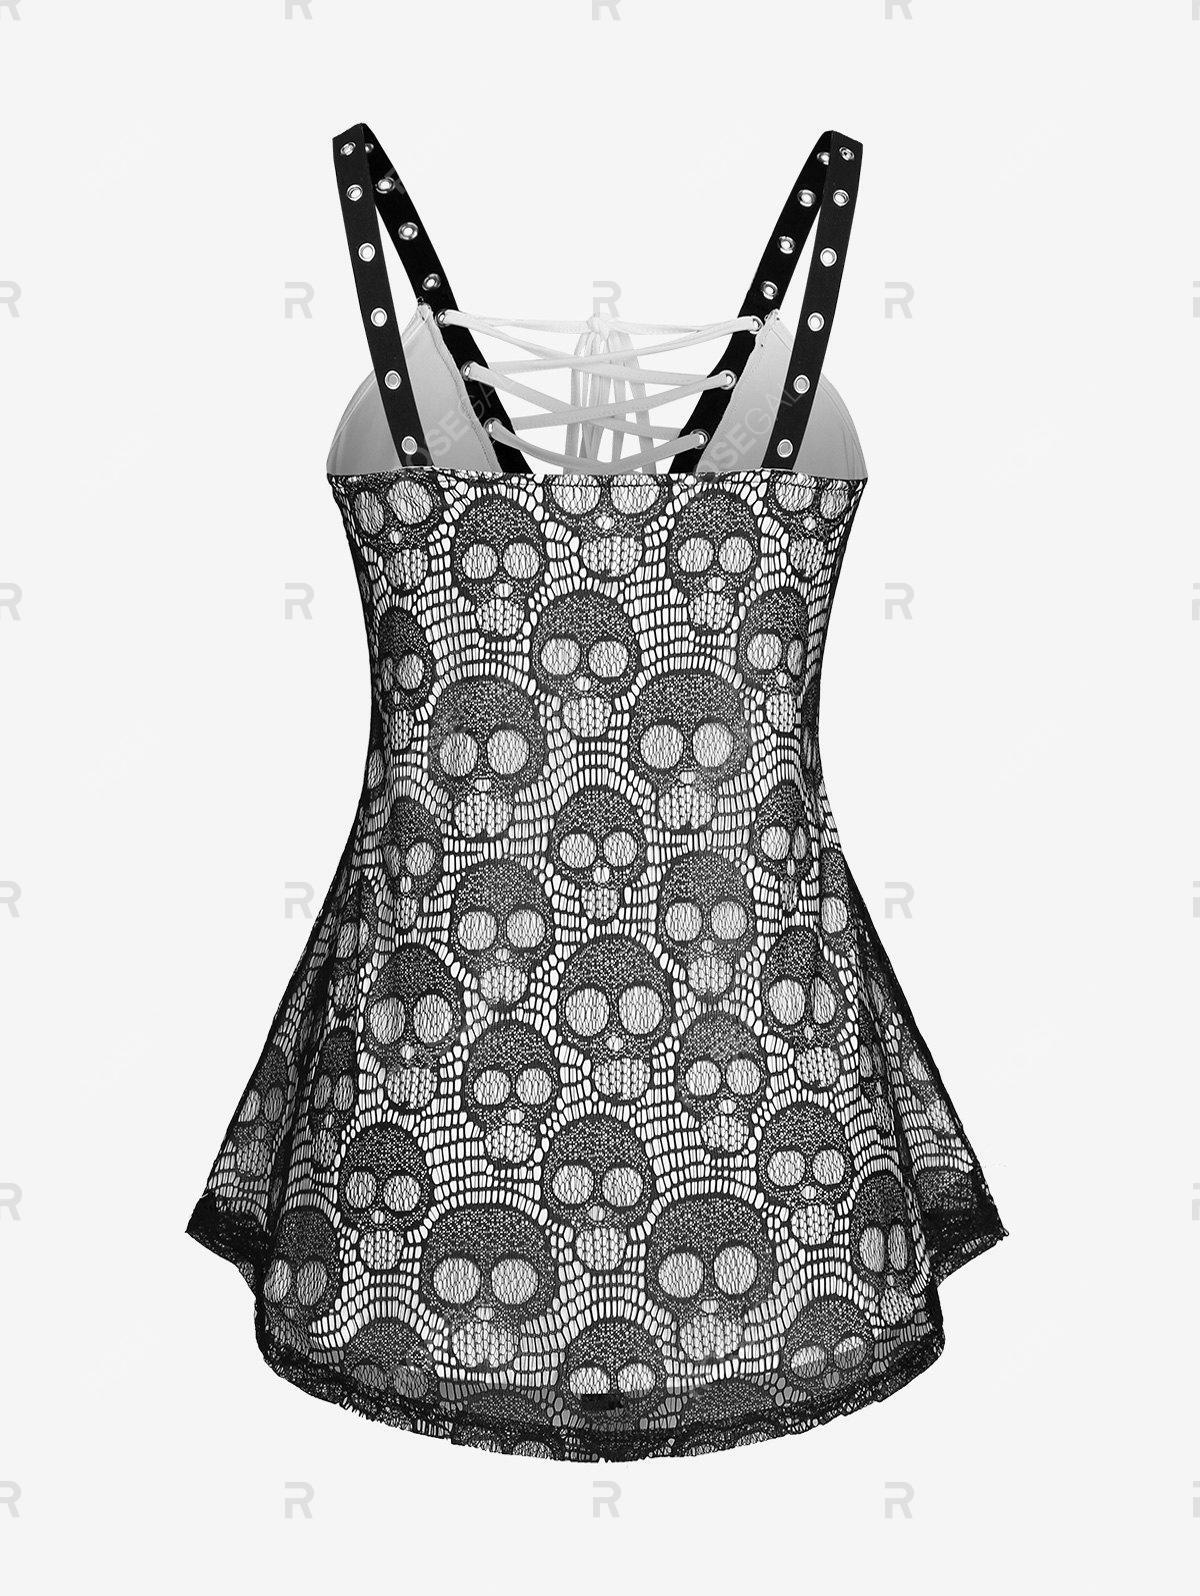 Lace Skull Grommet Tank Top and Buckle Cutout Leggings Plus Size Summer Outfit